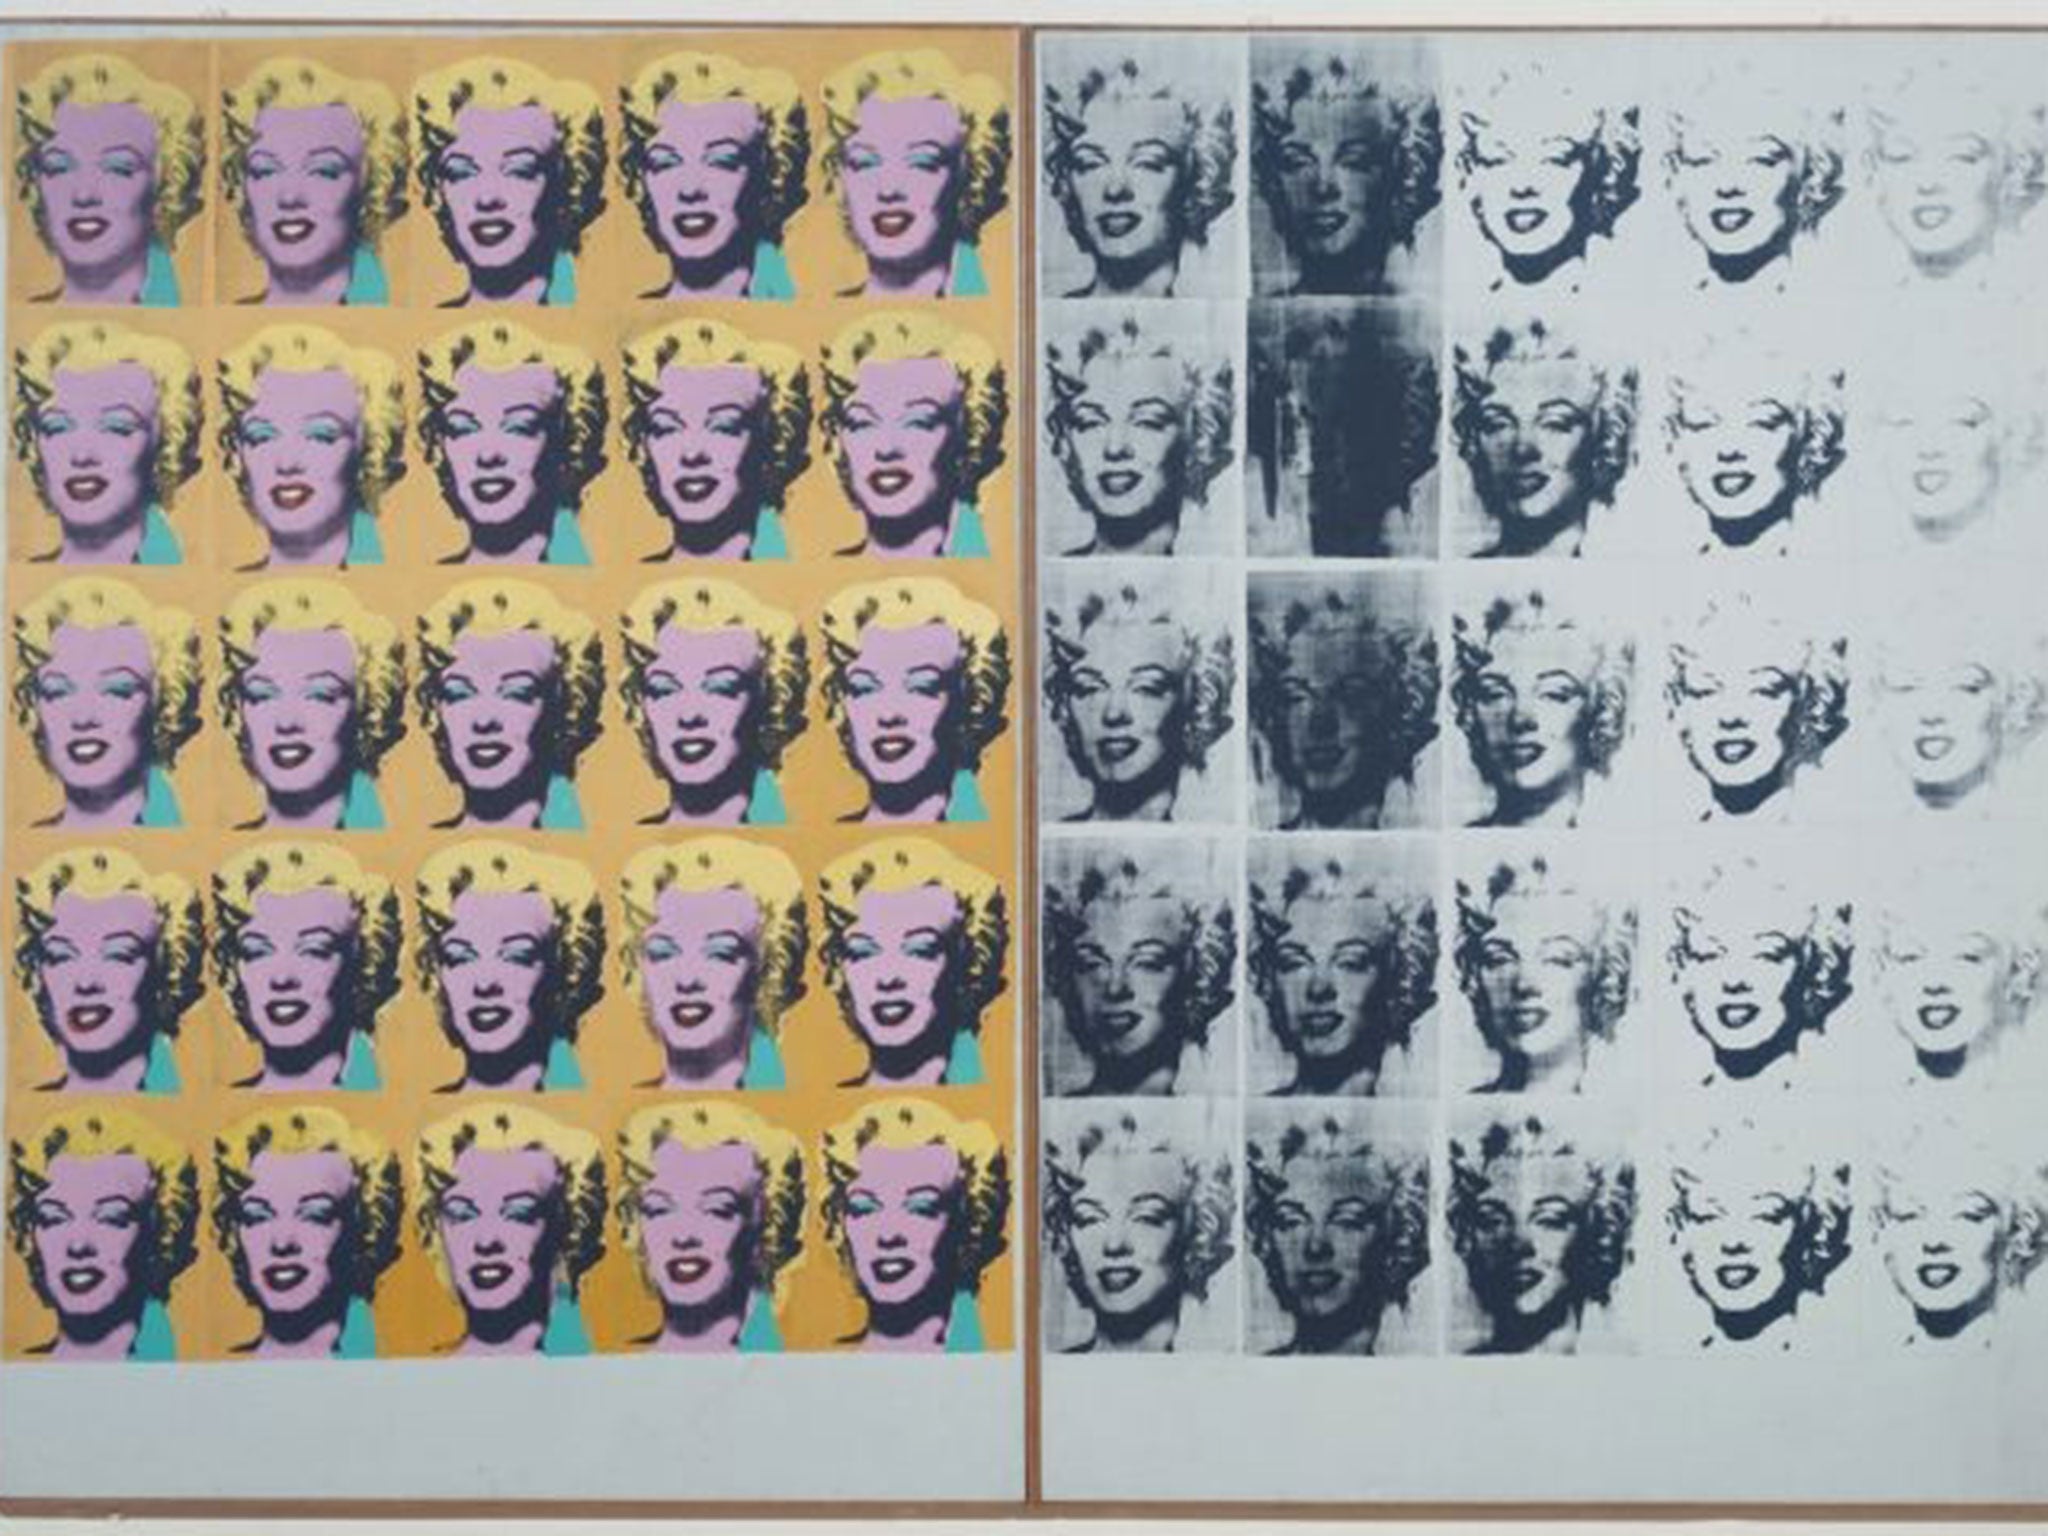 Andy Warhol’s ‘Marilyn Diptych’ (1962)